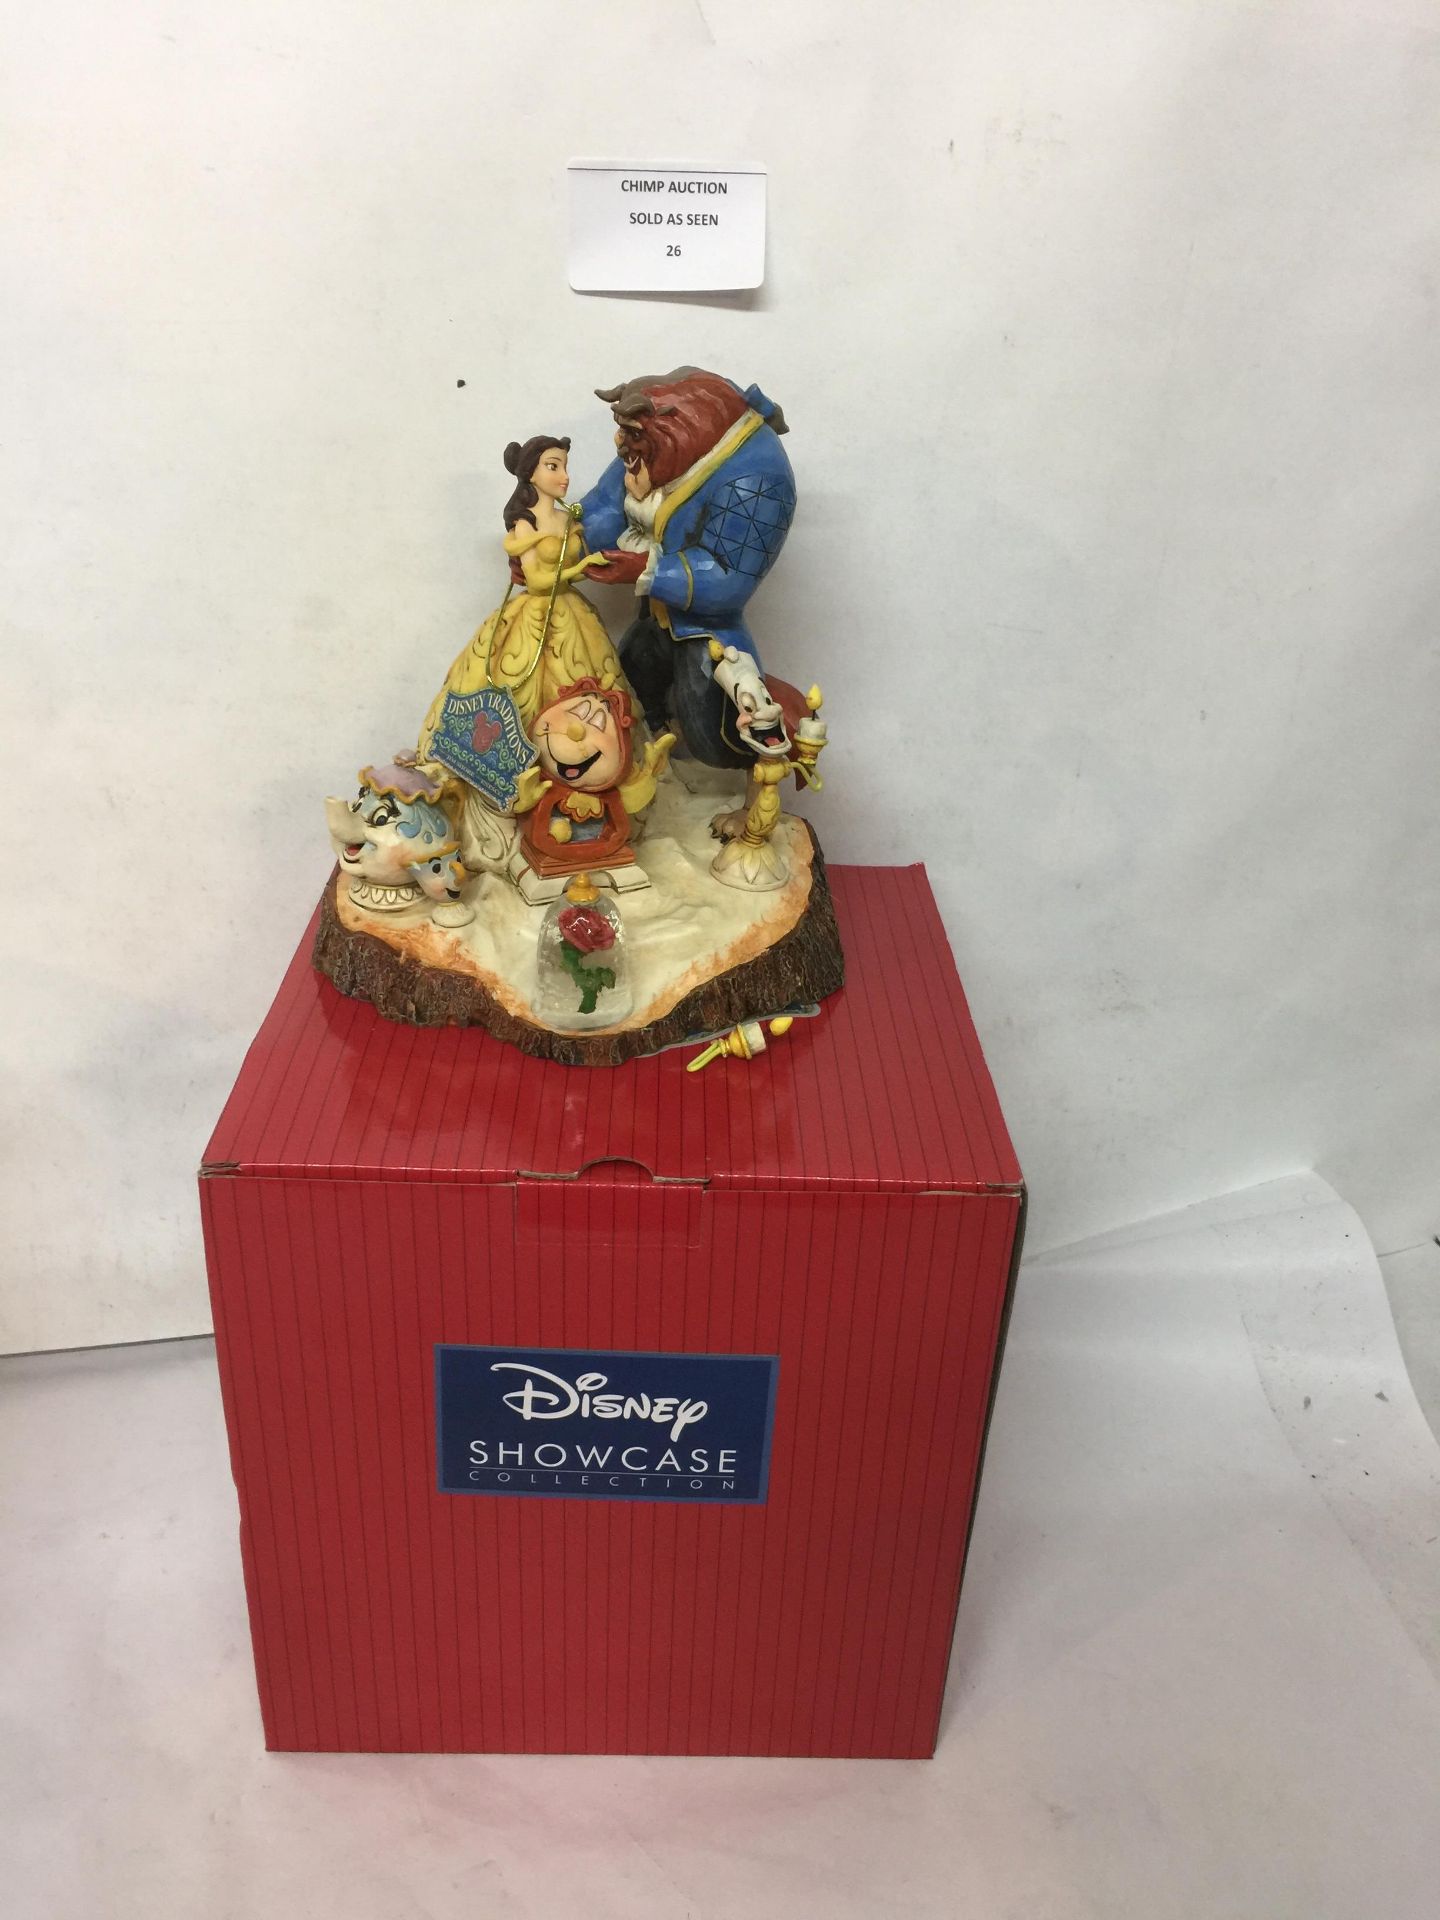 TALE AS OLD AS TIME DISNEY SHOW CASE FIGURINE